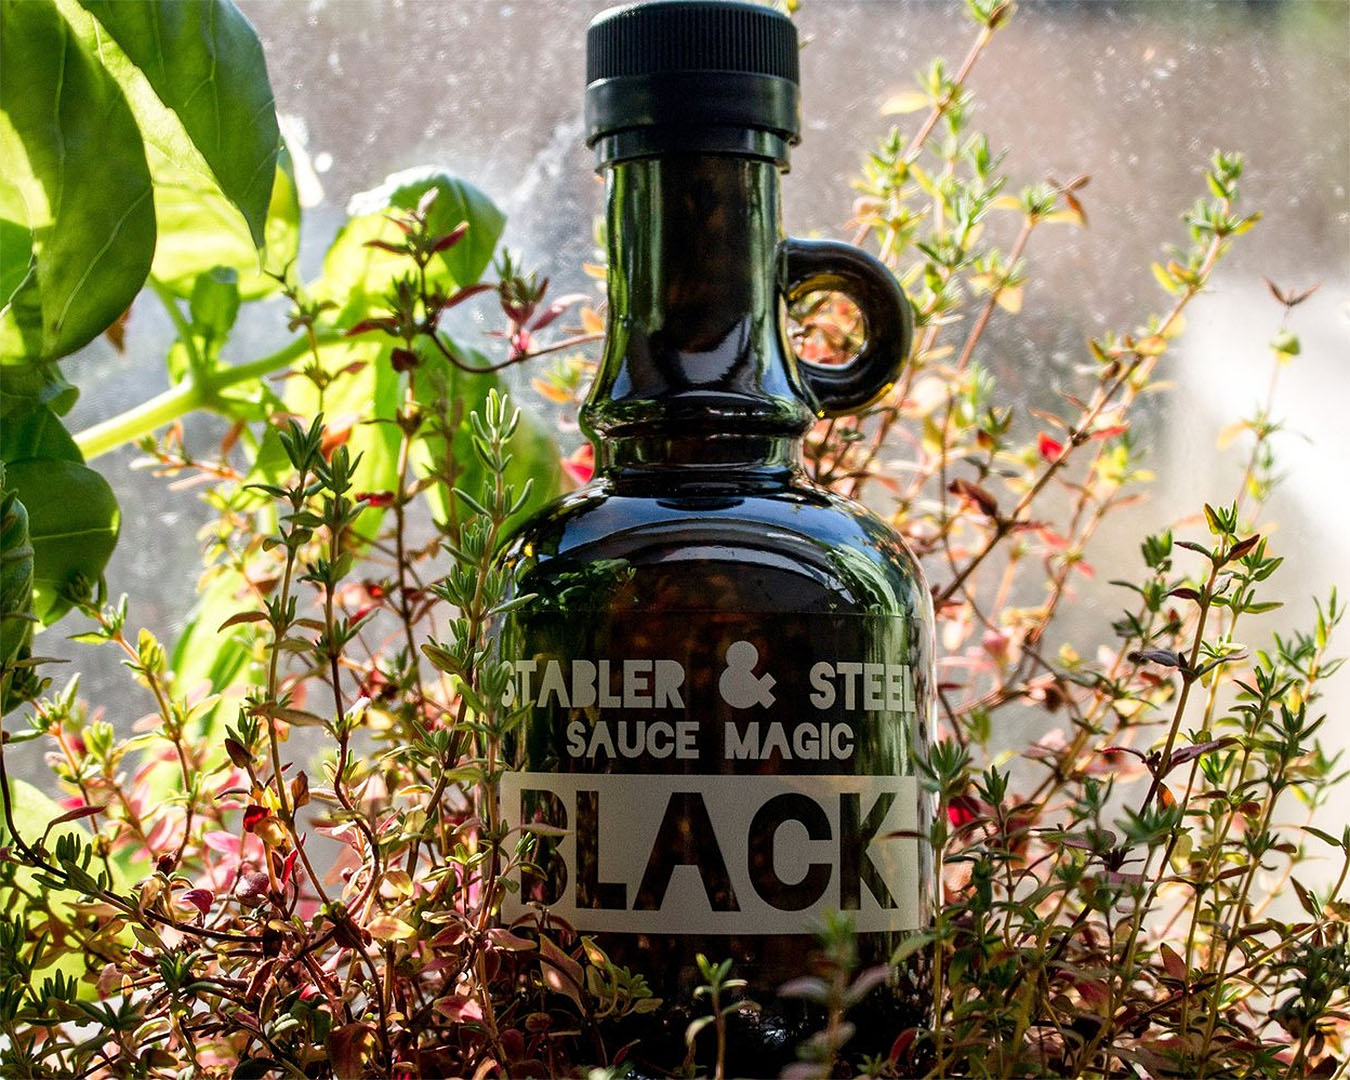 Stabler & Steel's Black Sauce magic sits amongst herbs in front of a window.